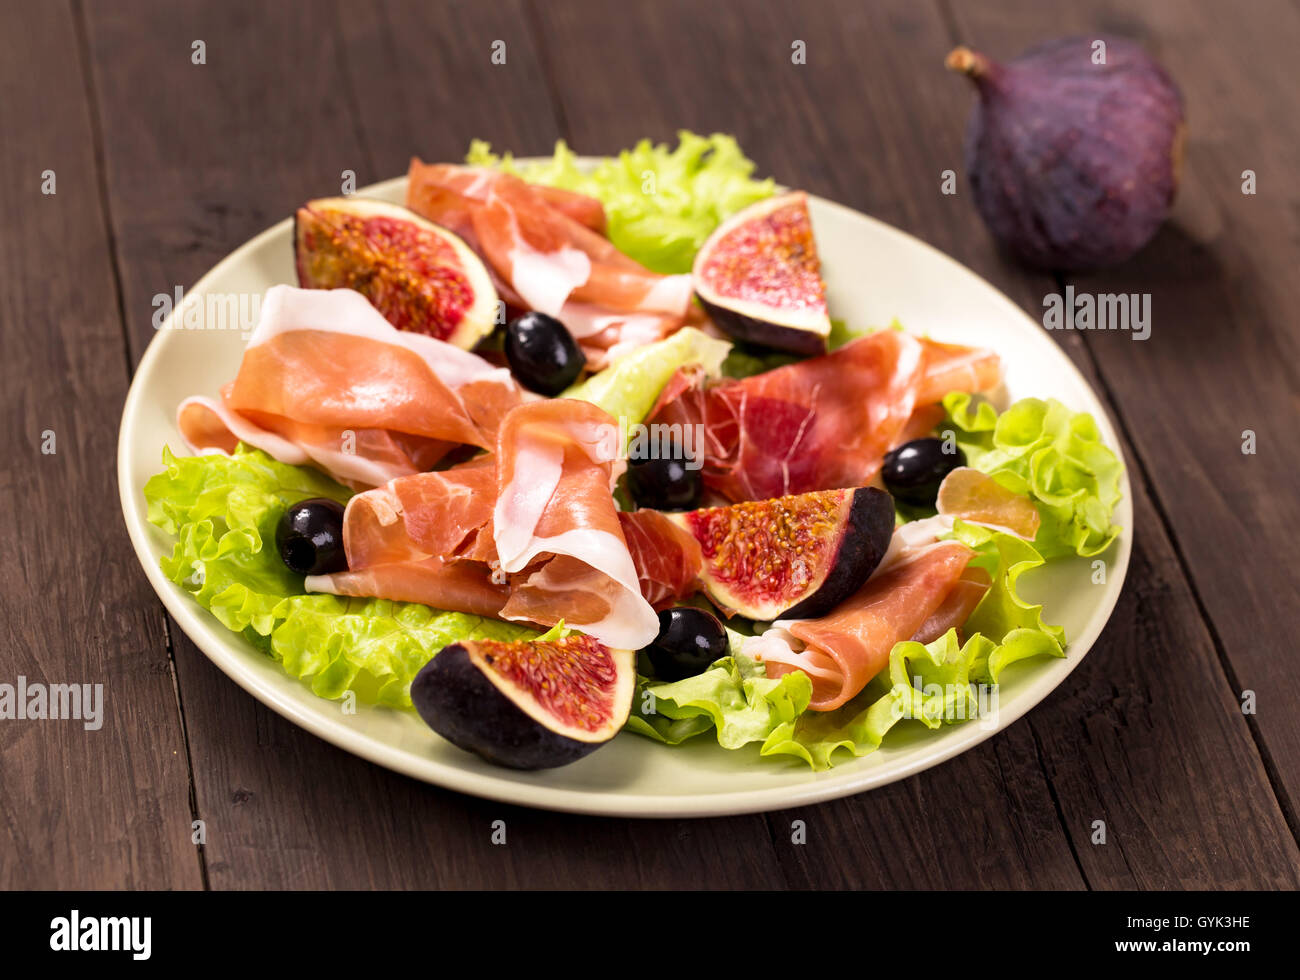 Prosciutto with figs, olives and arugula Stock Photo